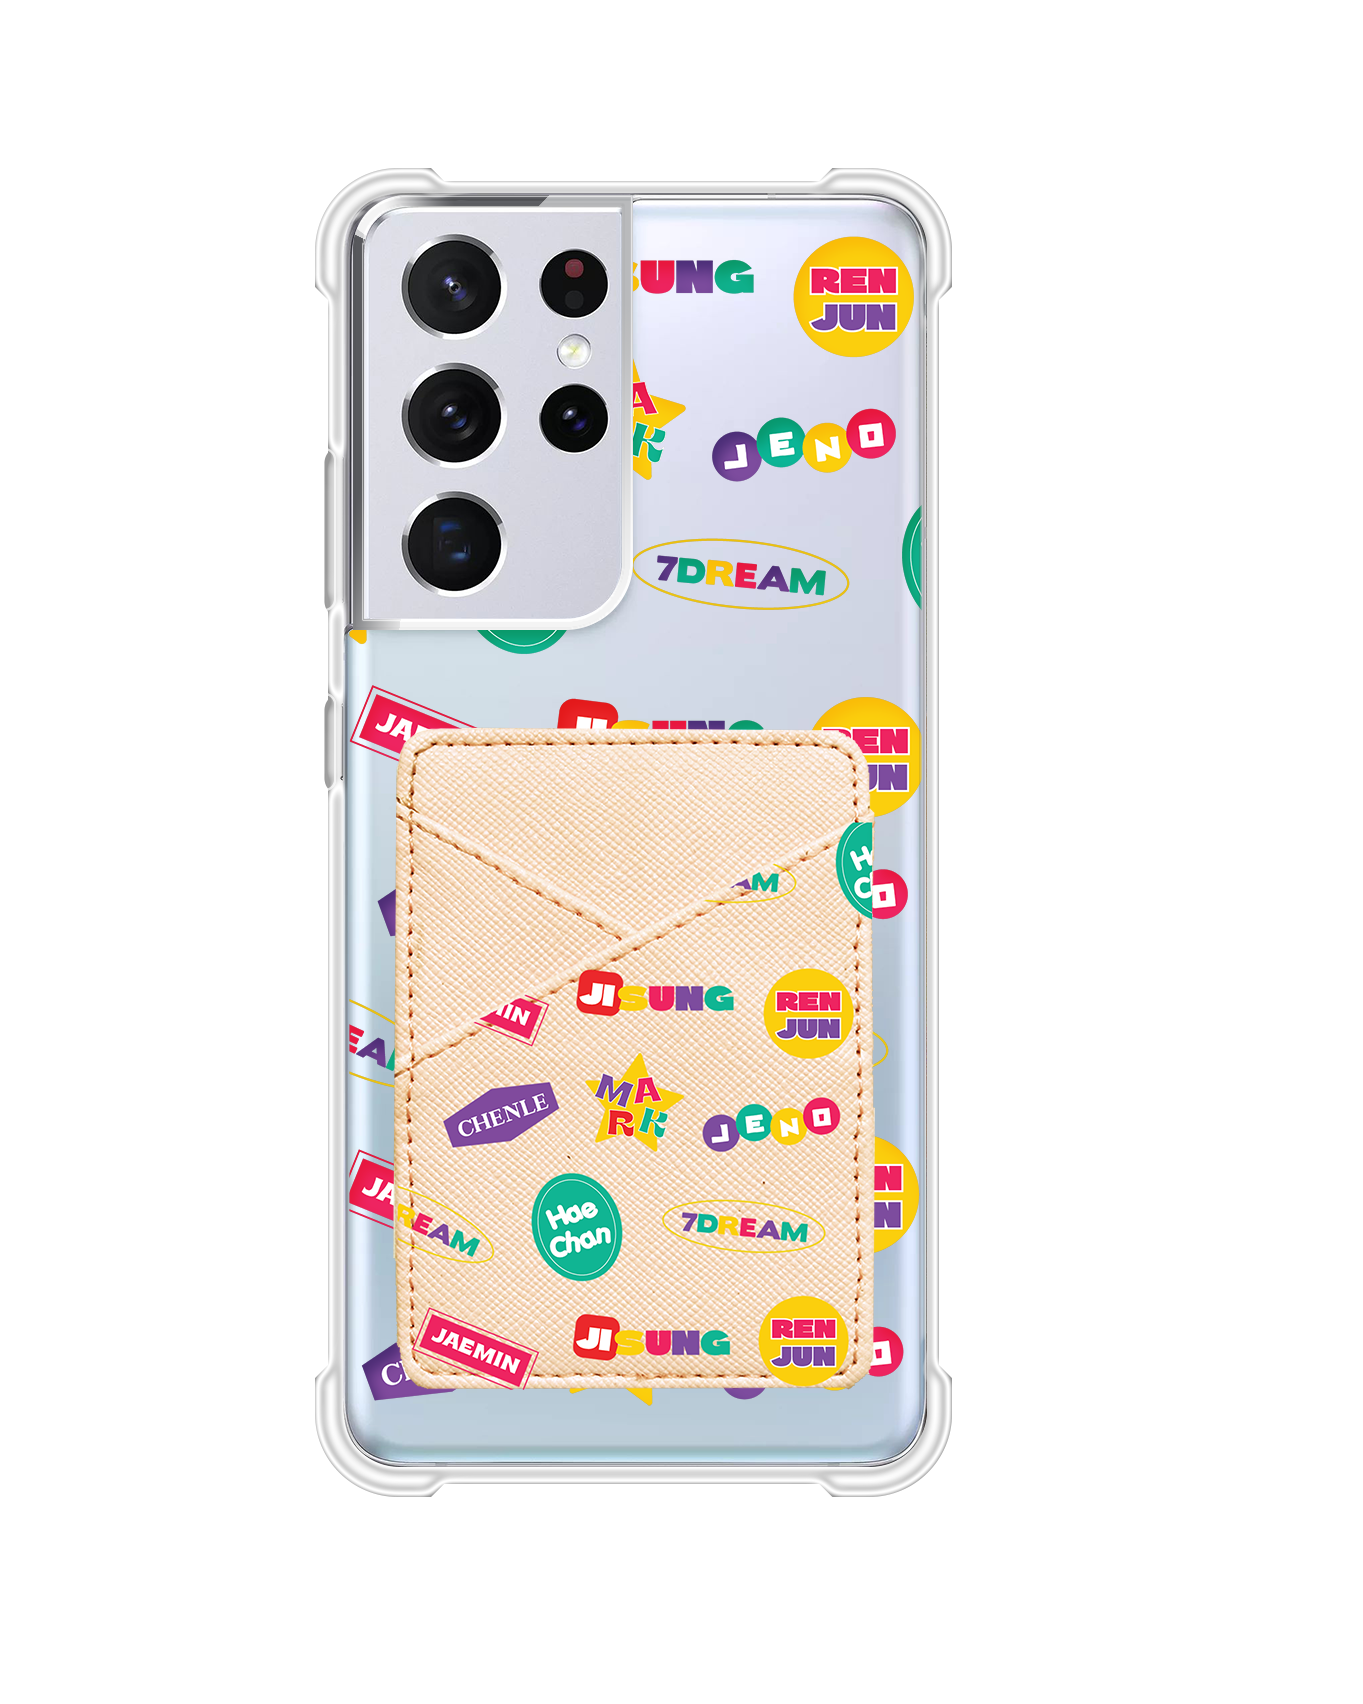 Android Phone Wallet Case - NCT Dream 7 Dream